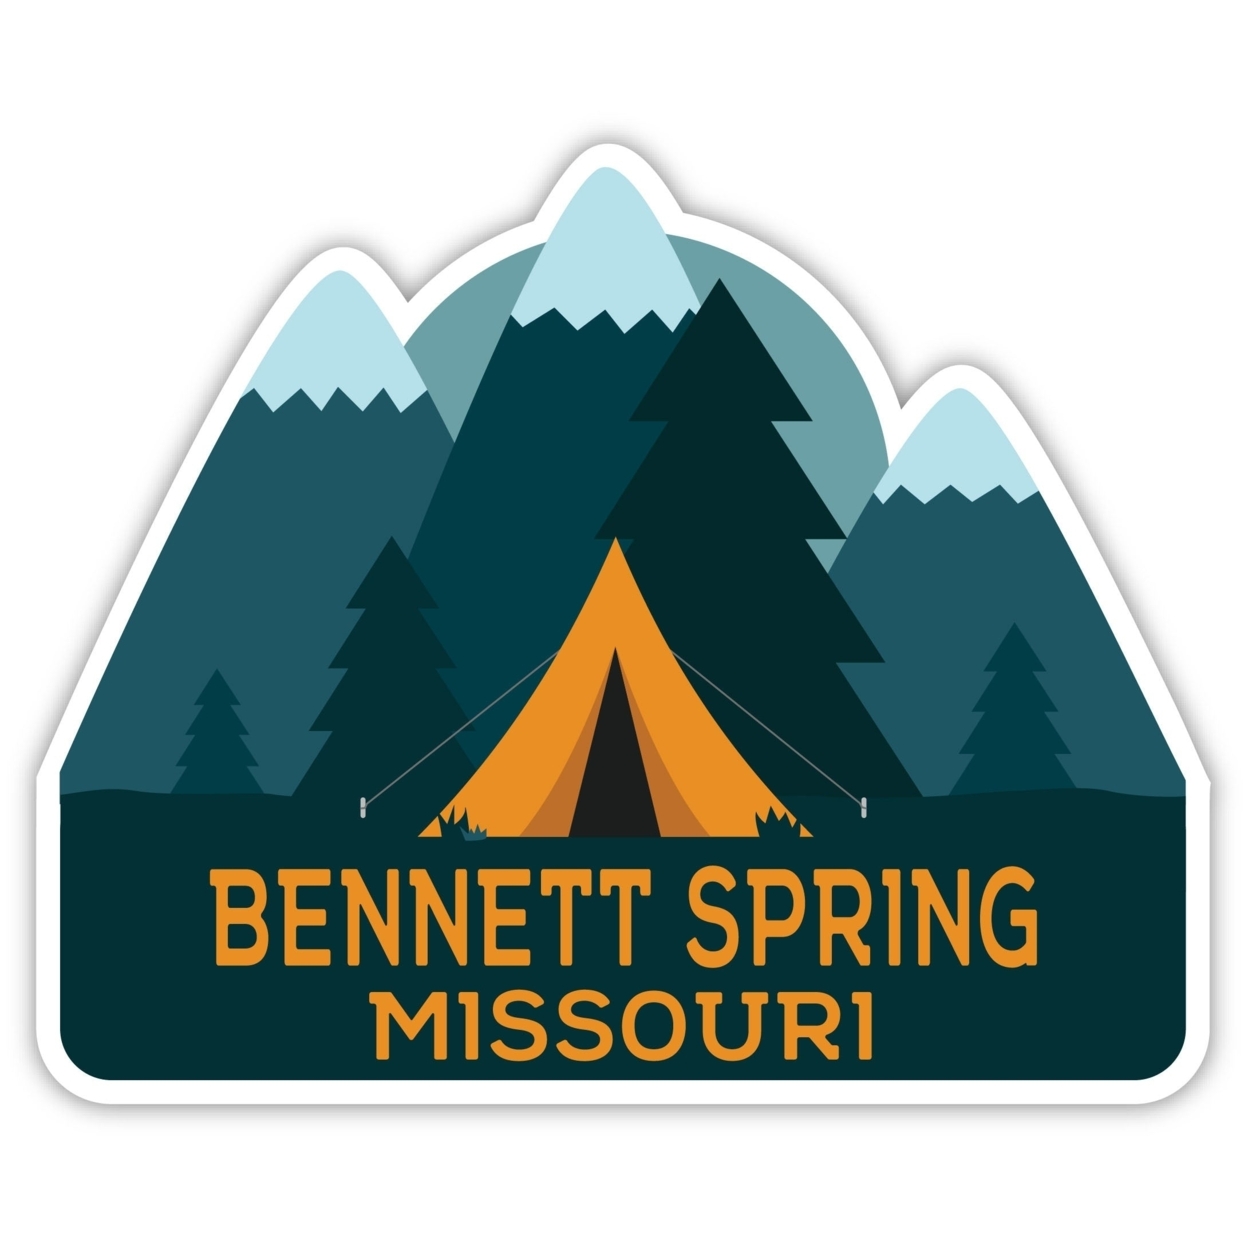 Bennett Spring Missouri Souvenir Decorative Stickers (Choose Theme And Size) - 4-Pack, 8-Inch, Tent